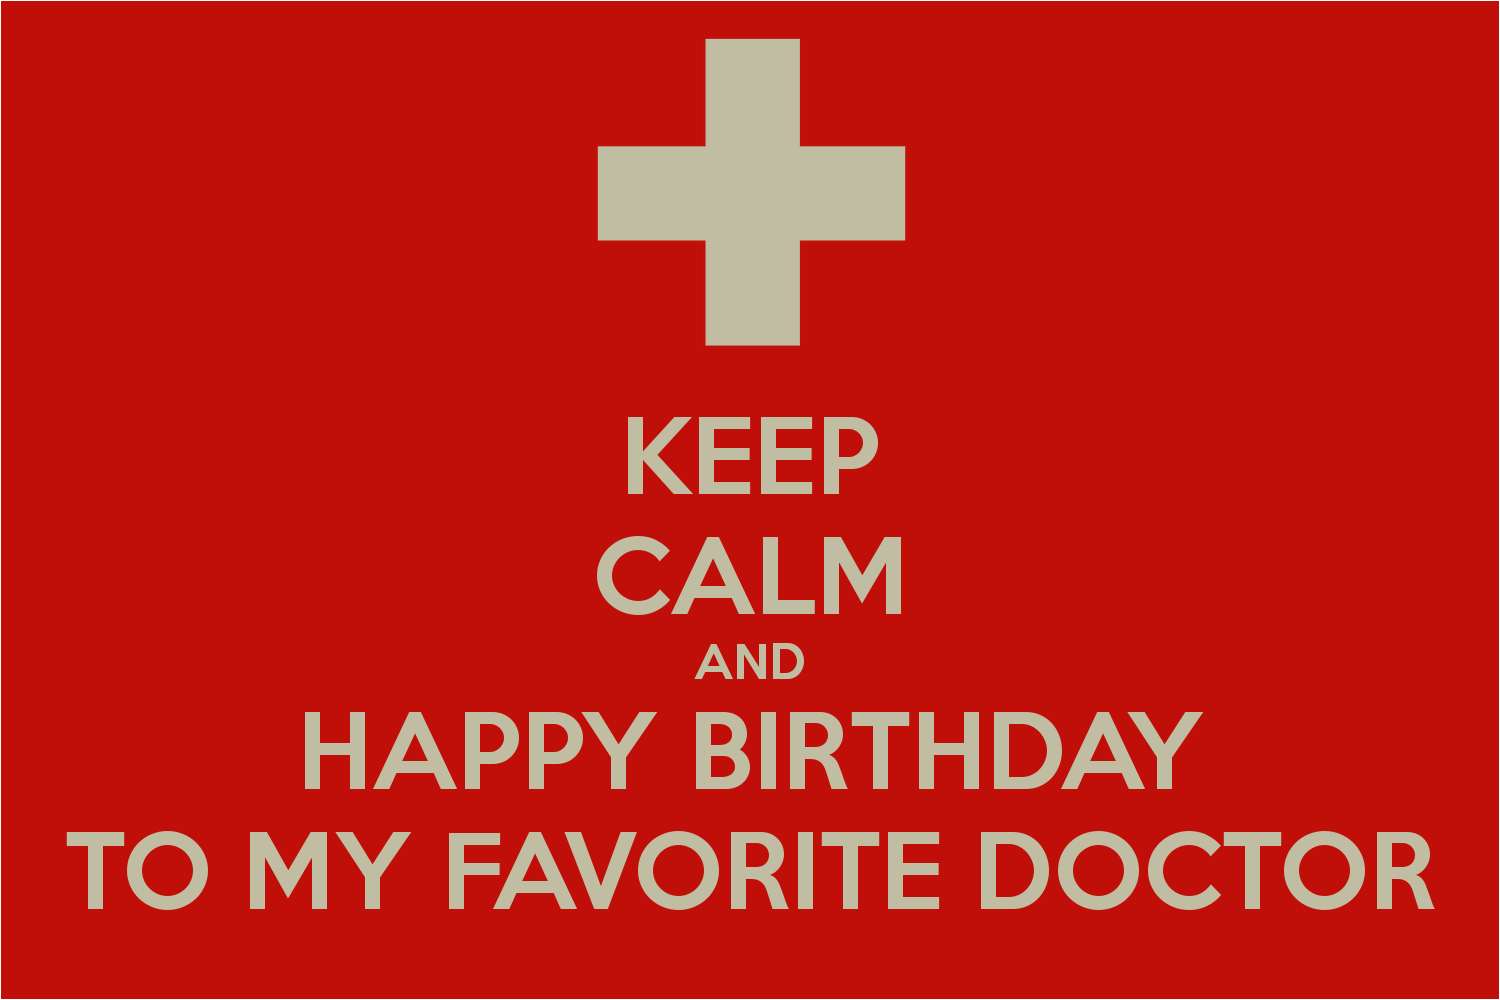 dr who birthday quotes